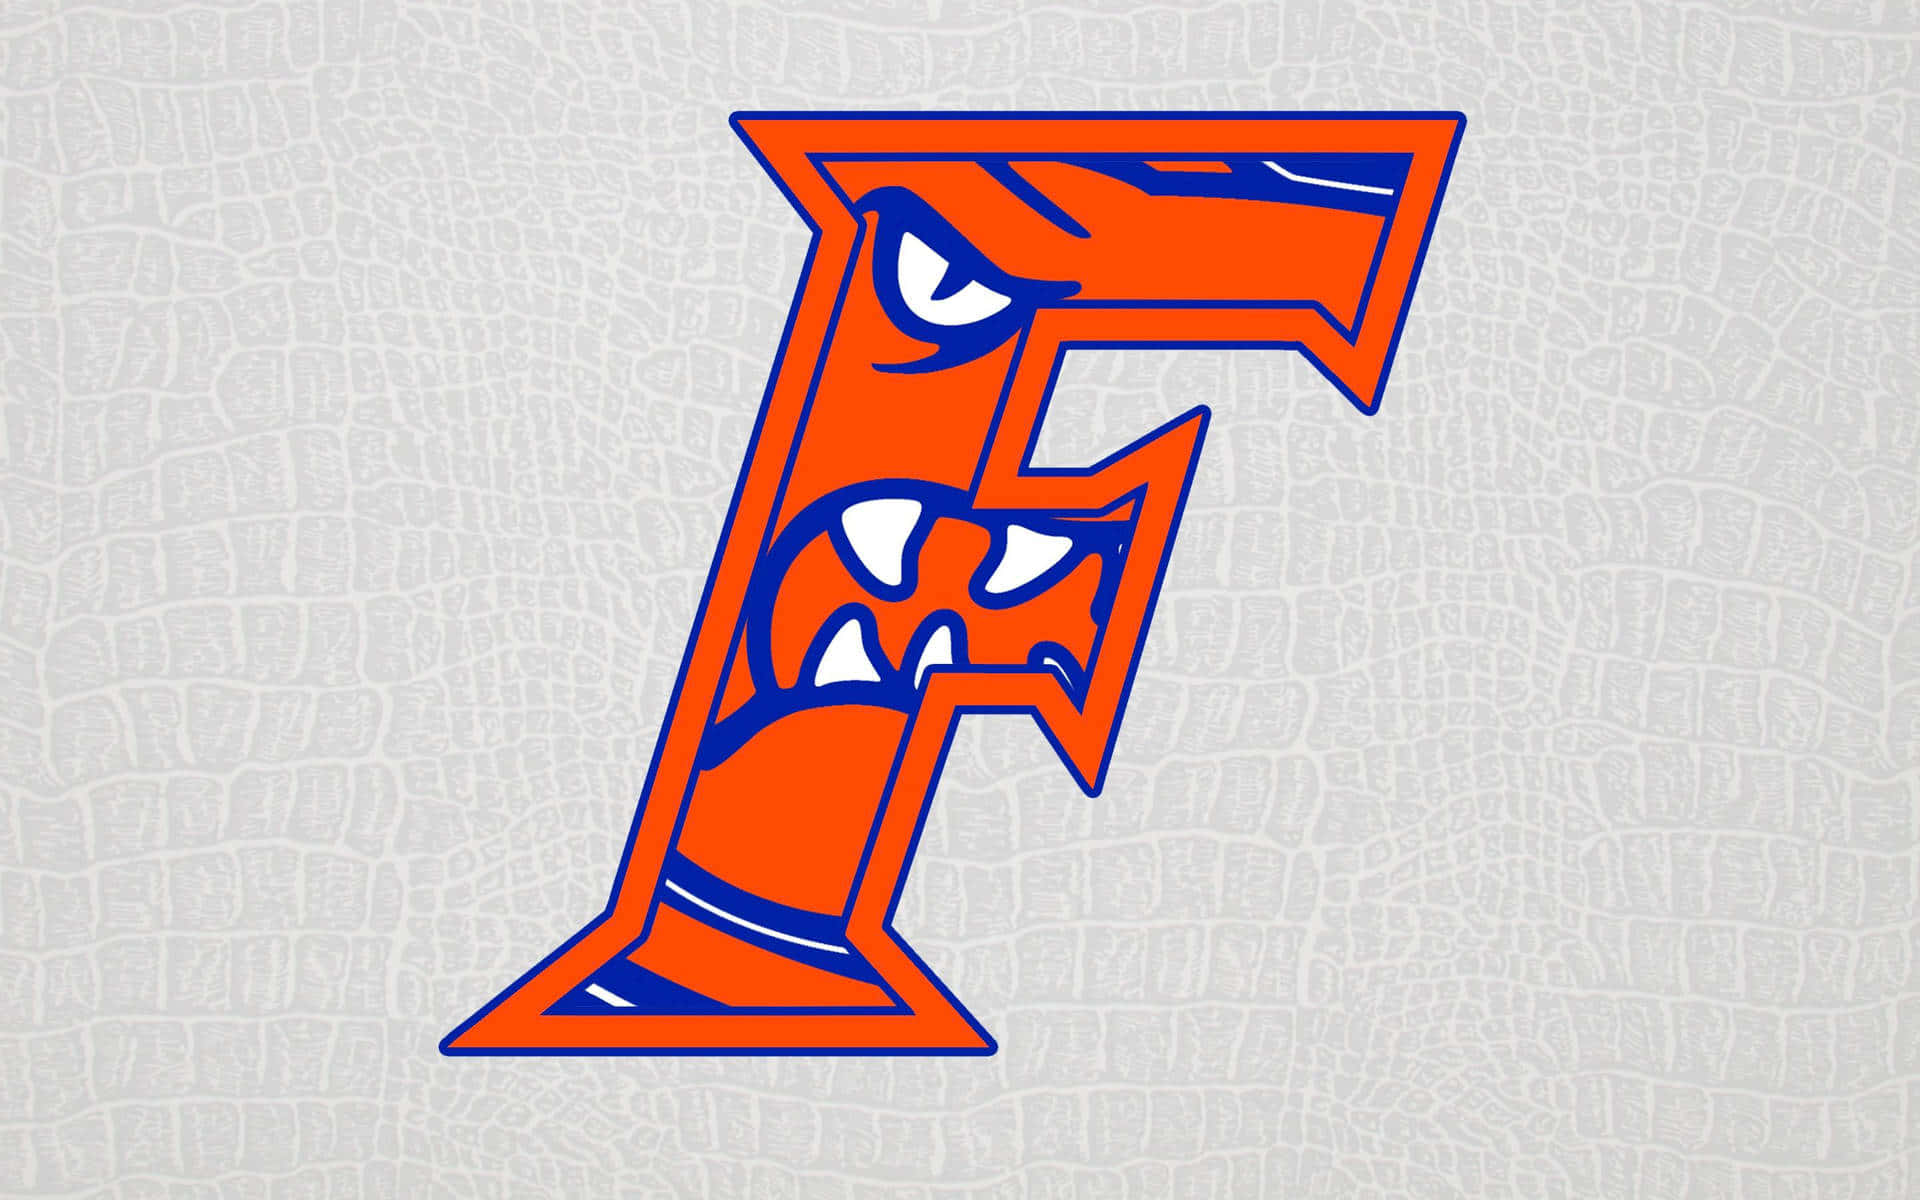 Show your love for the Florida Gators with this logo! Wallpaper